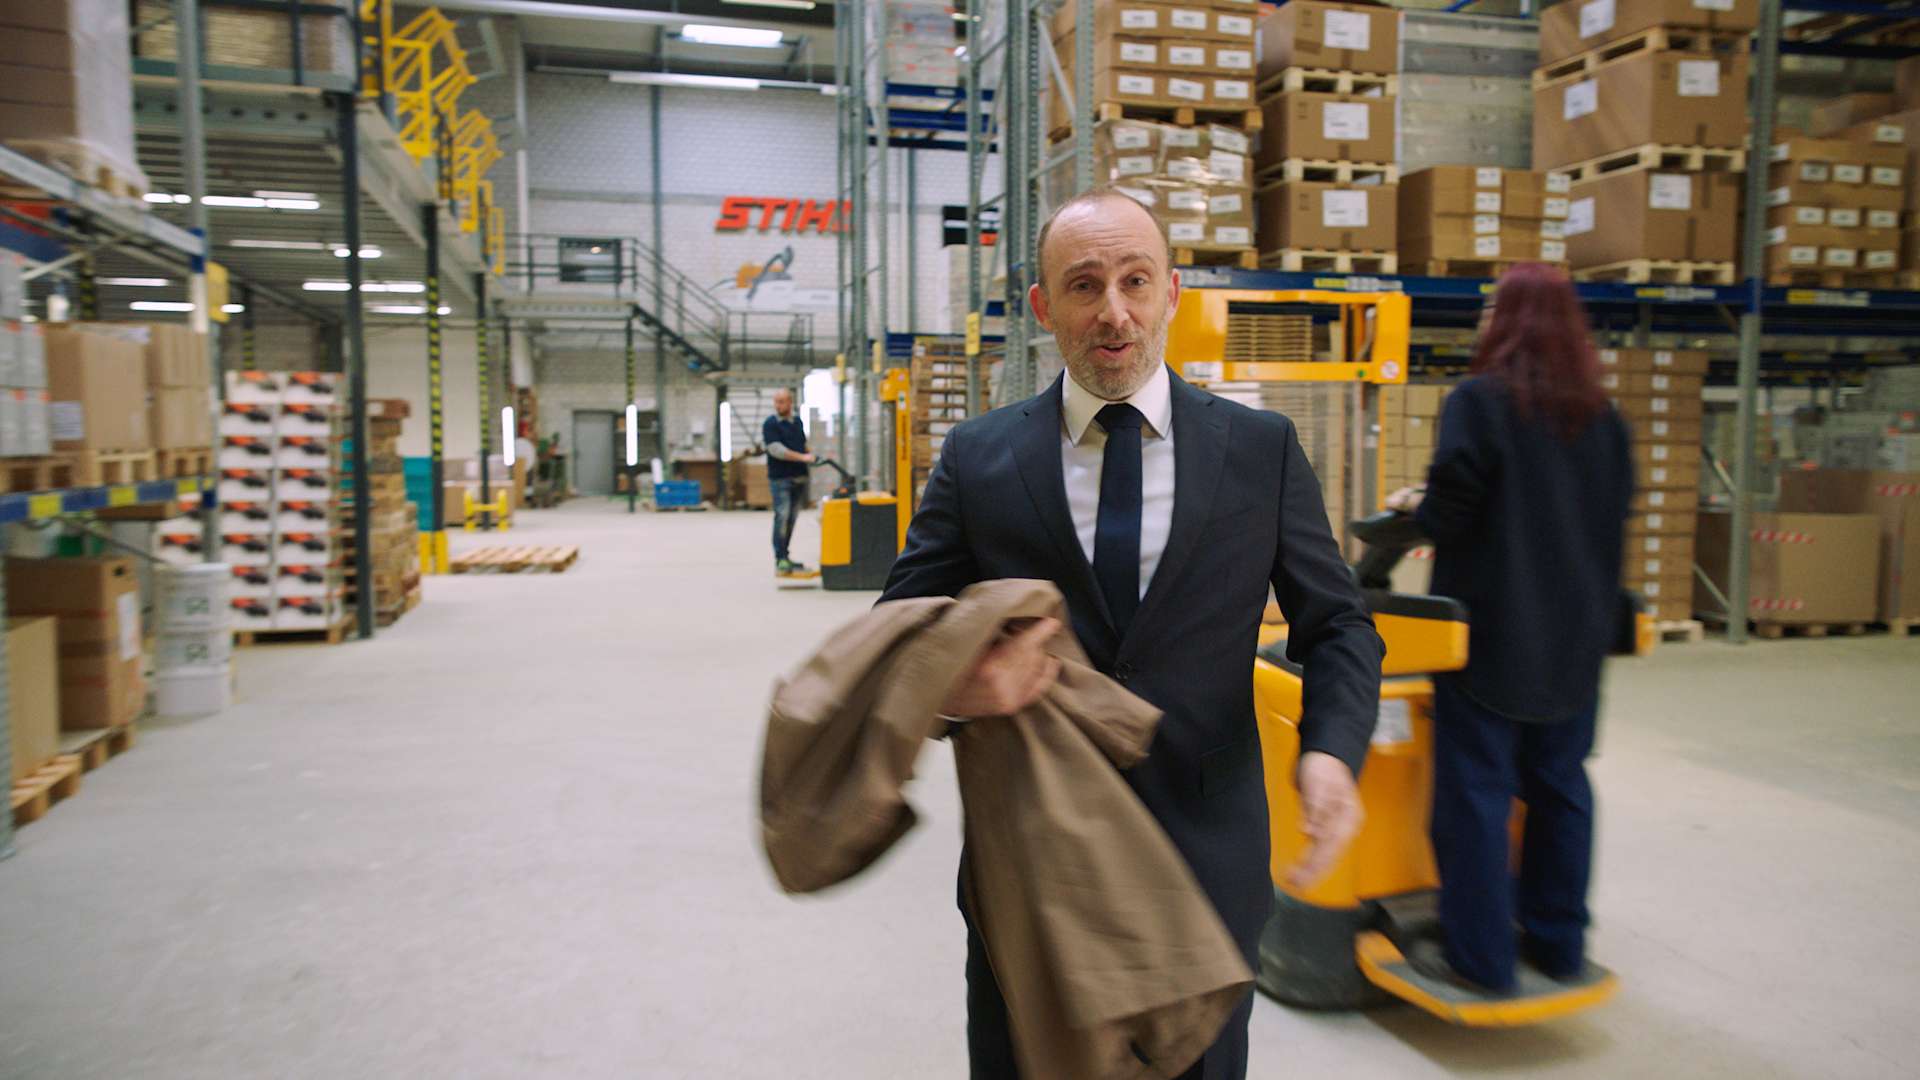 The main actor of the bank avera commercial in the raw footage in a hall of the Stihl gmbh